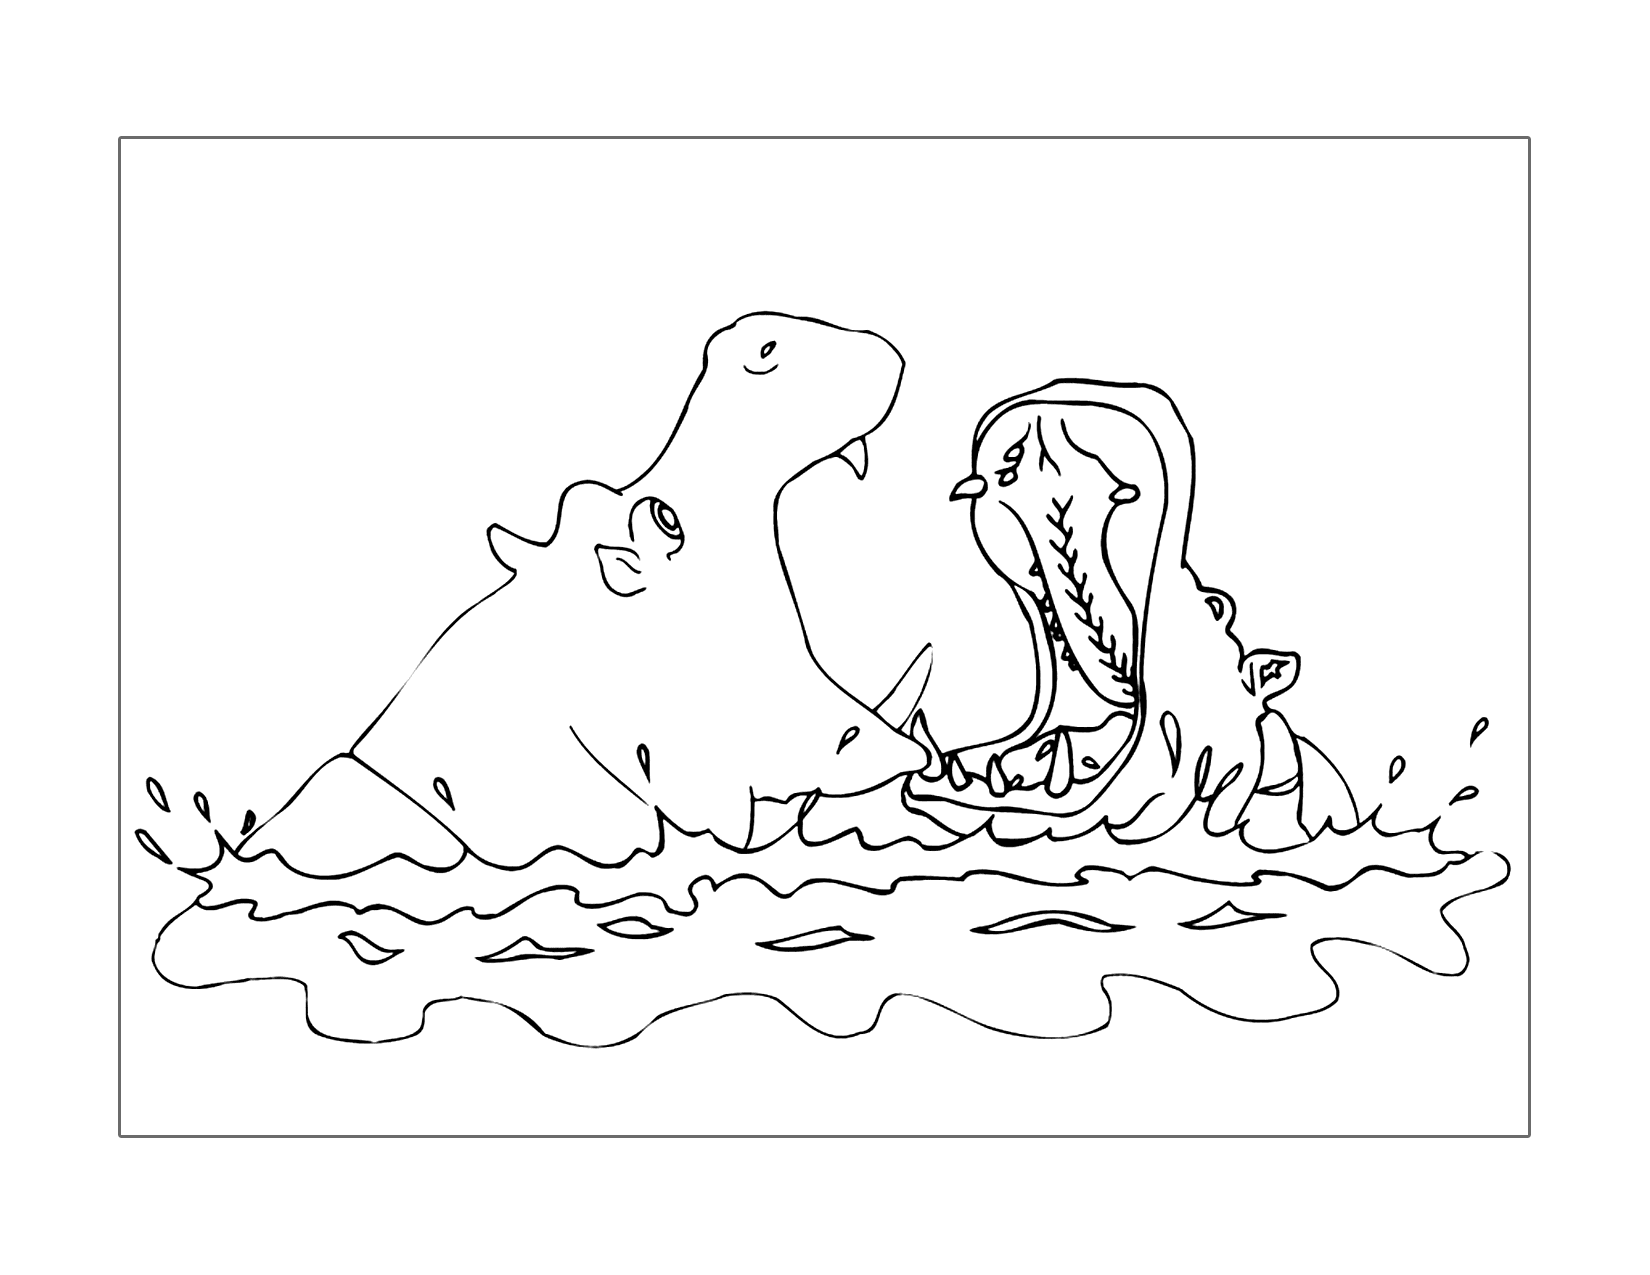 Hippo Fight Coloring Page